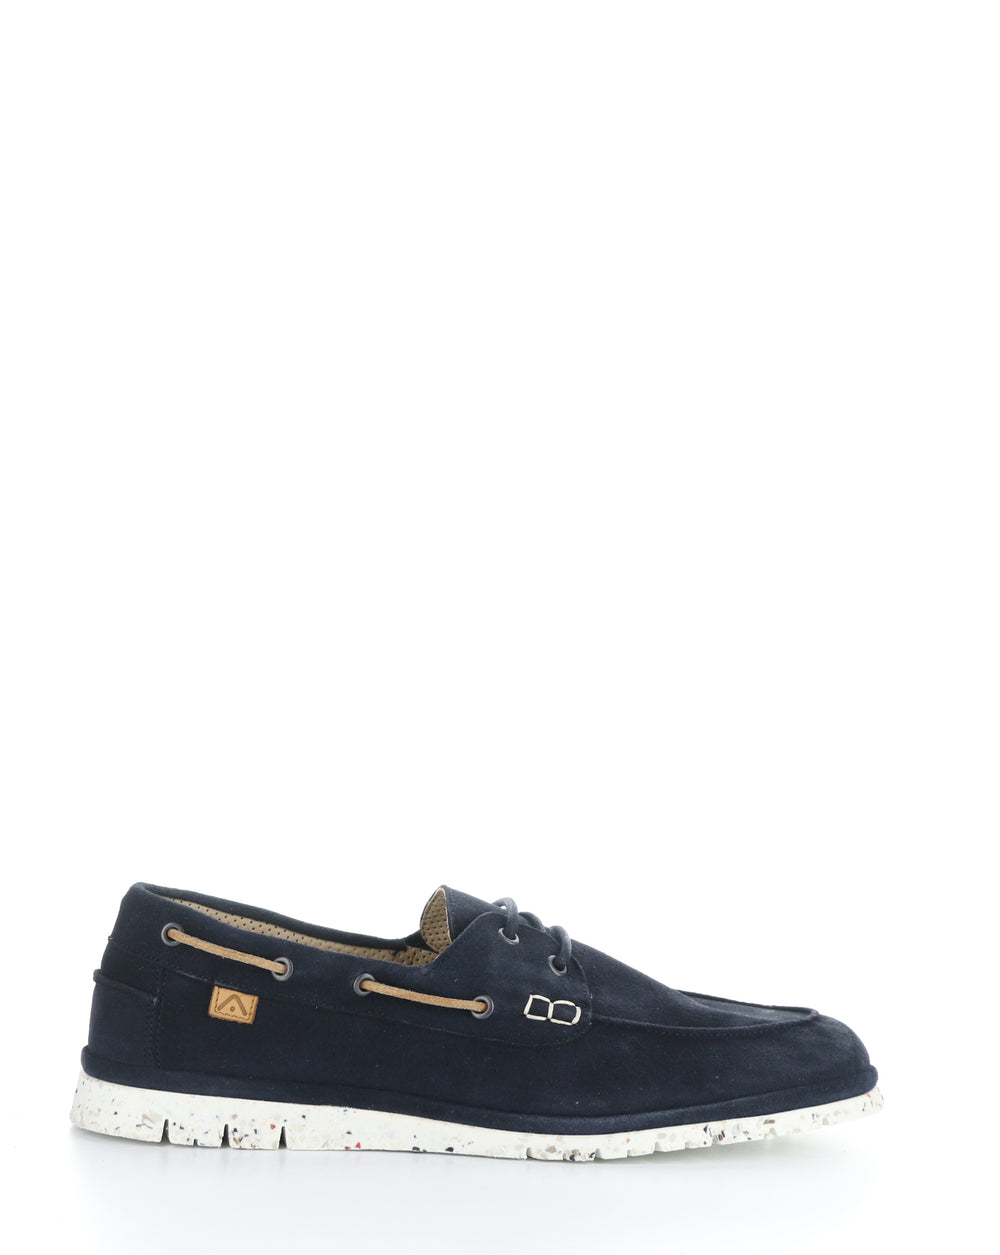 11910A NAVY Round Toe Shoes